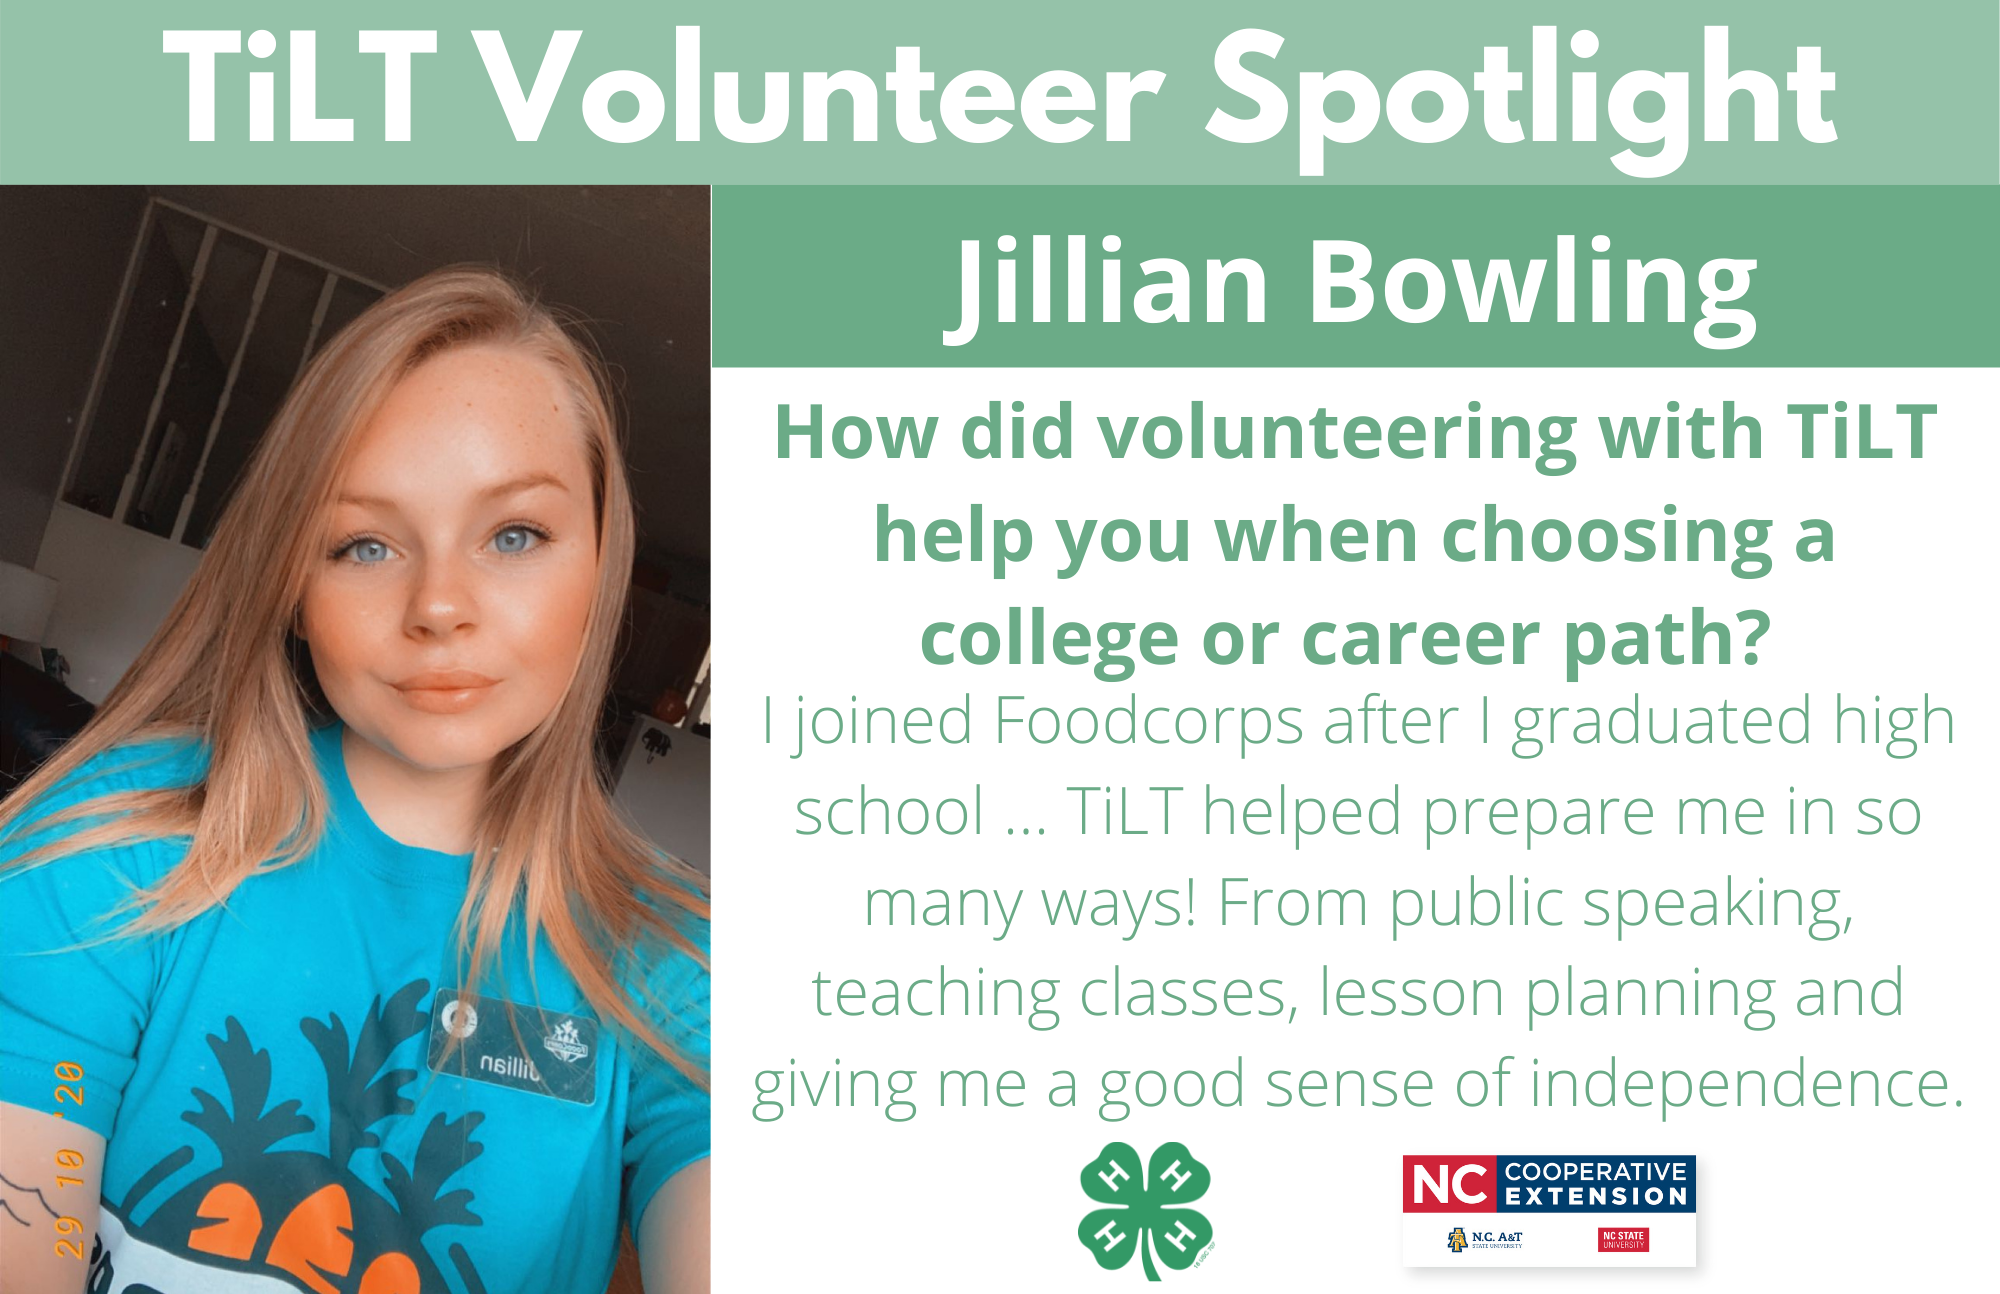 Headshot of Jillian Bowling with following text to the right of image. TiLT Volunteer Spotlight. Jillian Bowling. How did volunteering with TiLT help you when choosing a college or career path? I joined Foodcorps after I graduated high school ... TiLT helped prepare me in so many ways! From public speaking, teaching classes, lesson planning and giving me a good sense of independence.